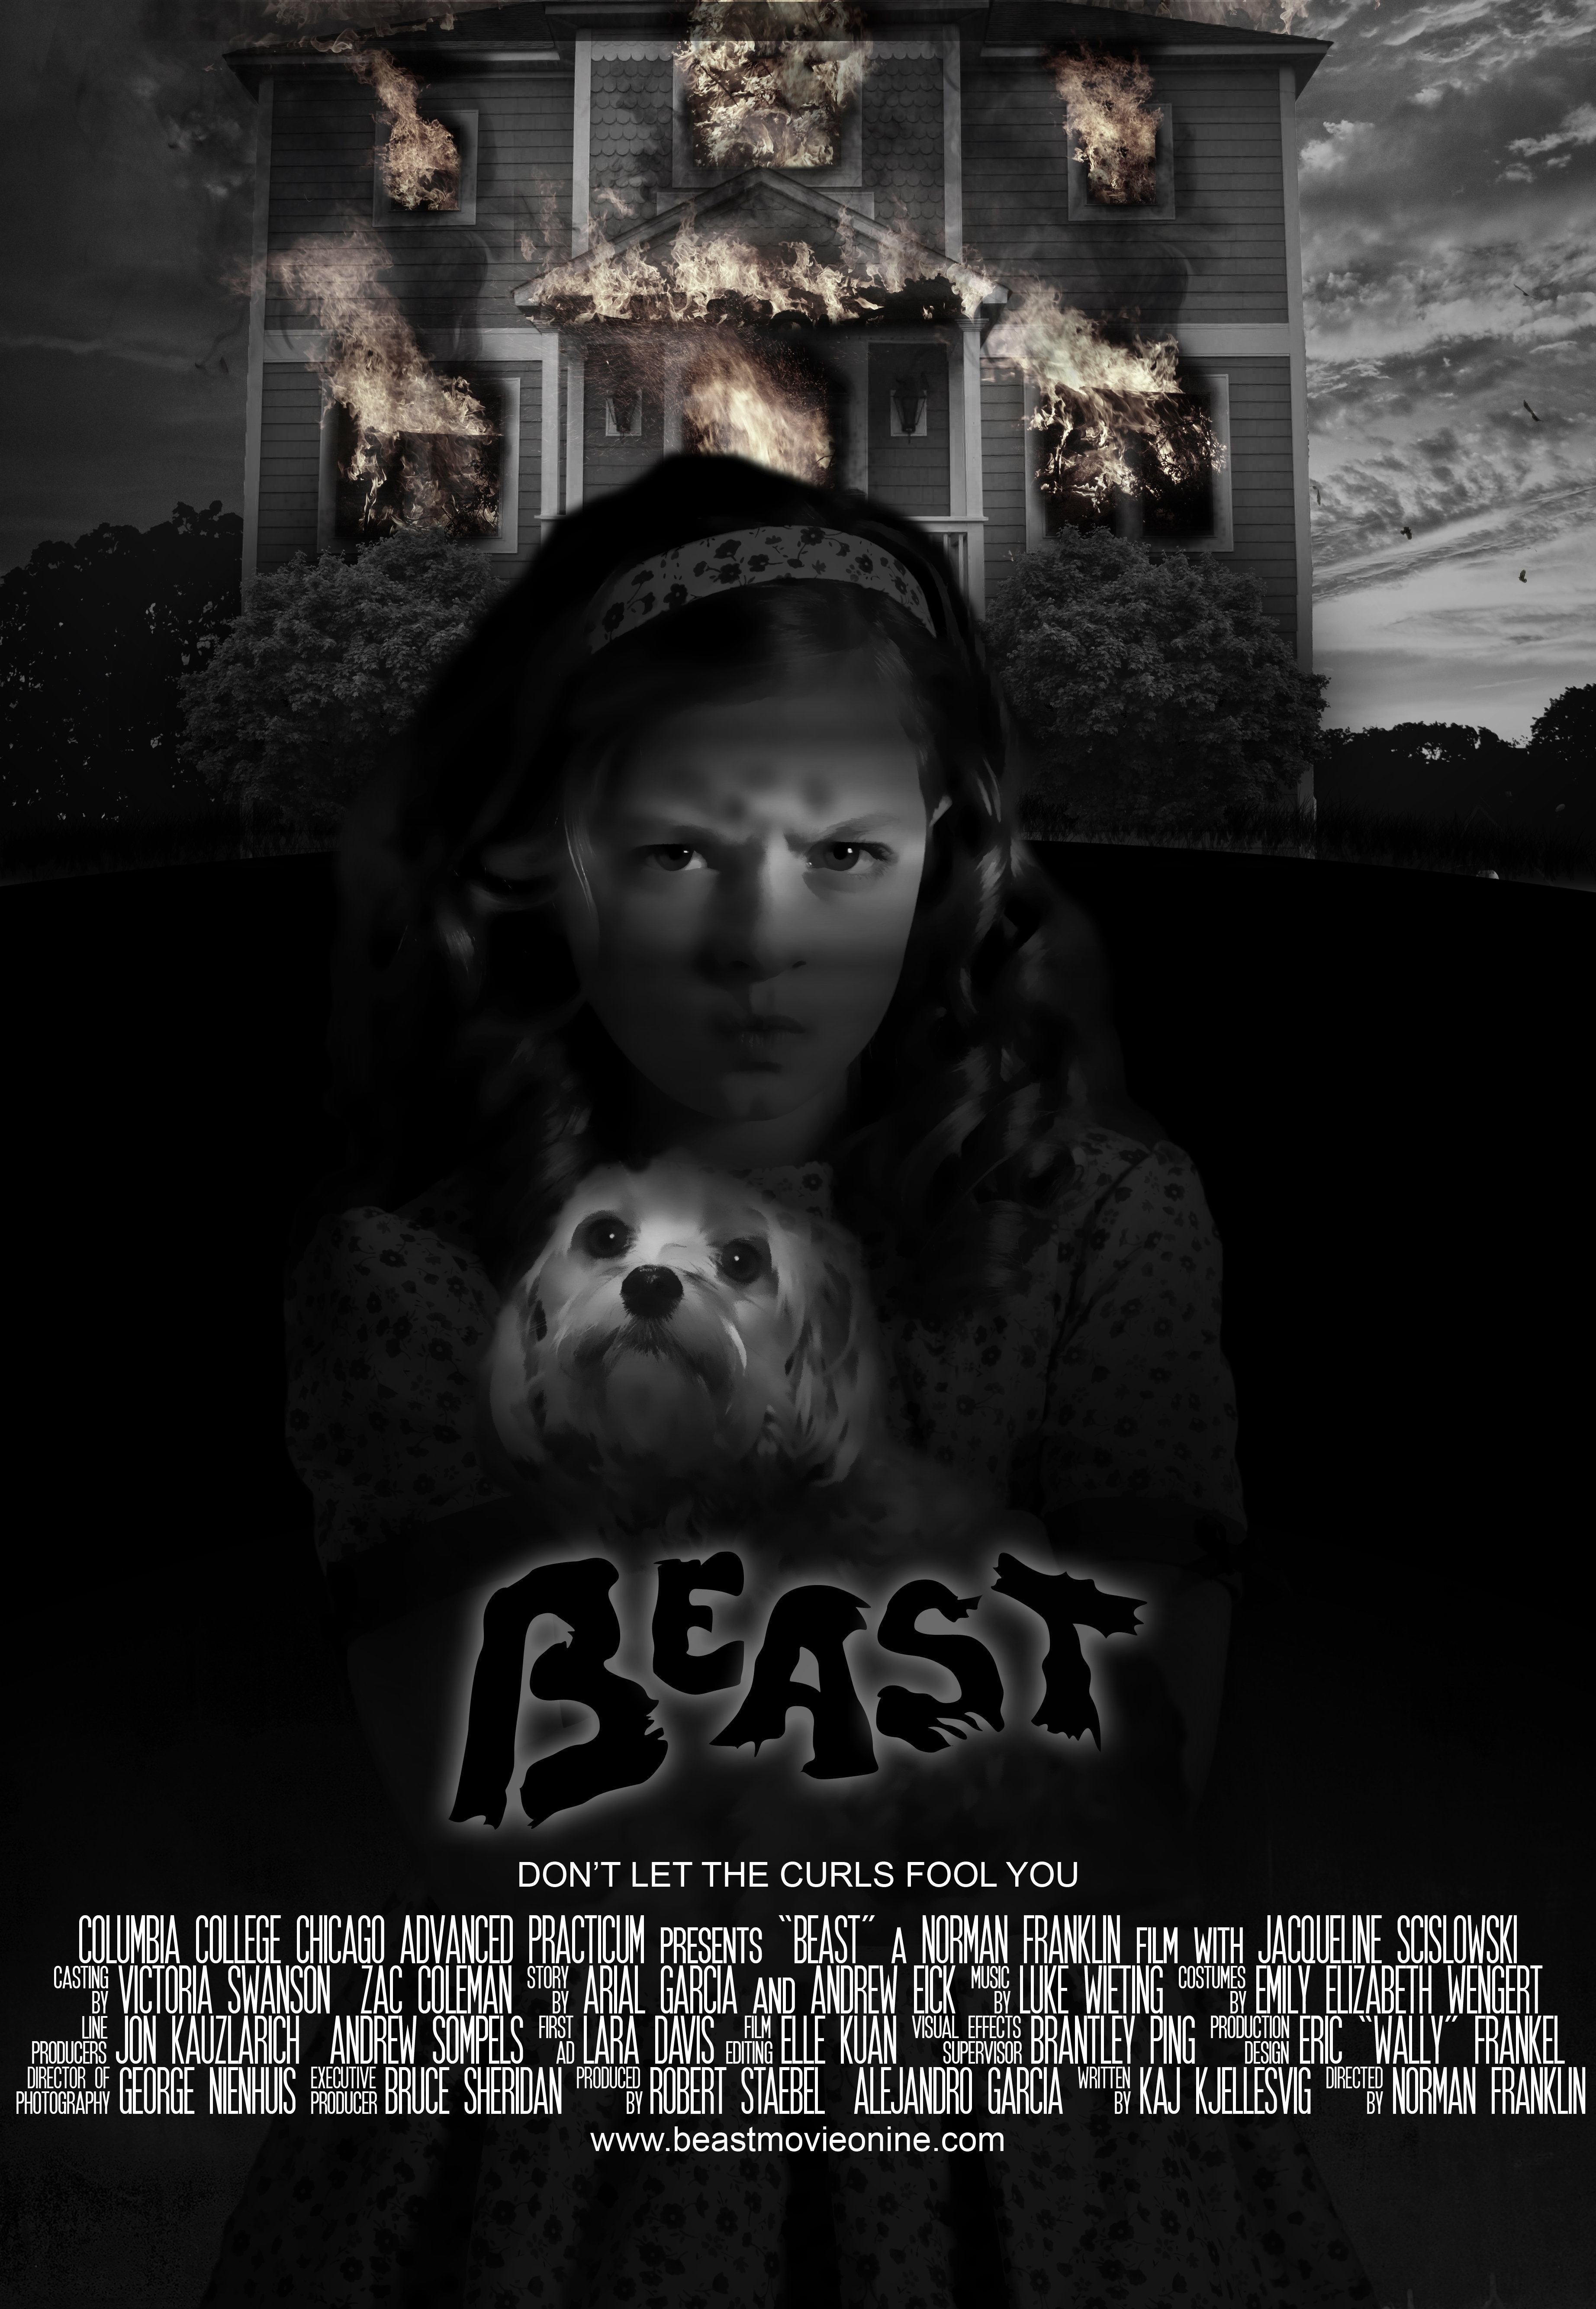 Production poster for the 2010 short film titled 